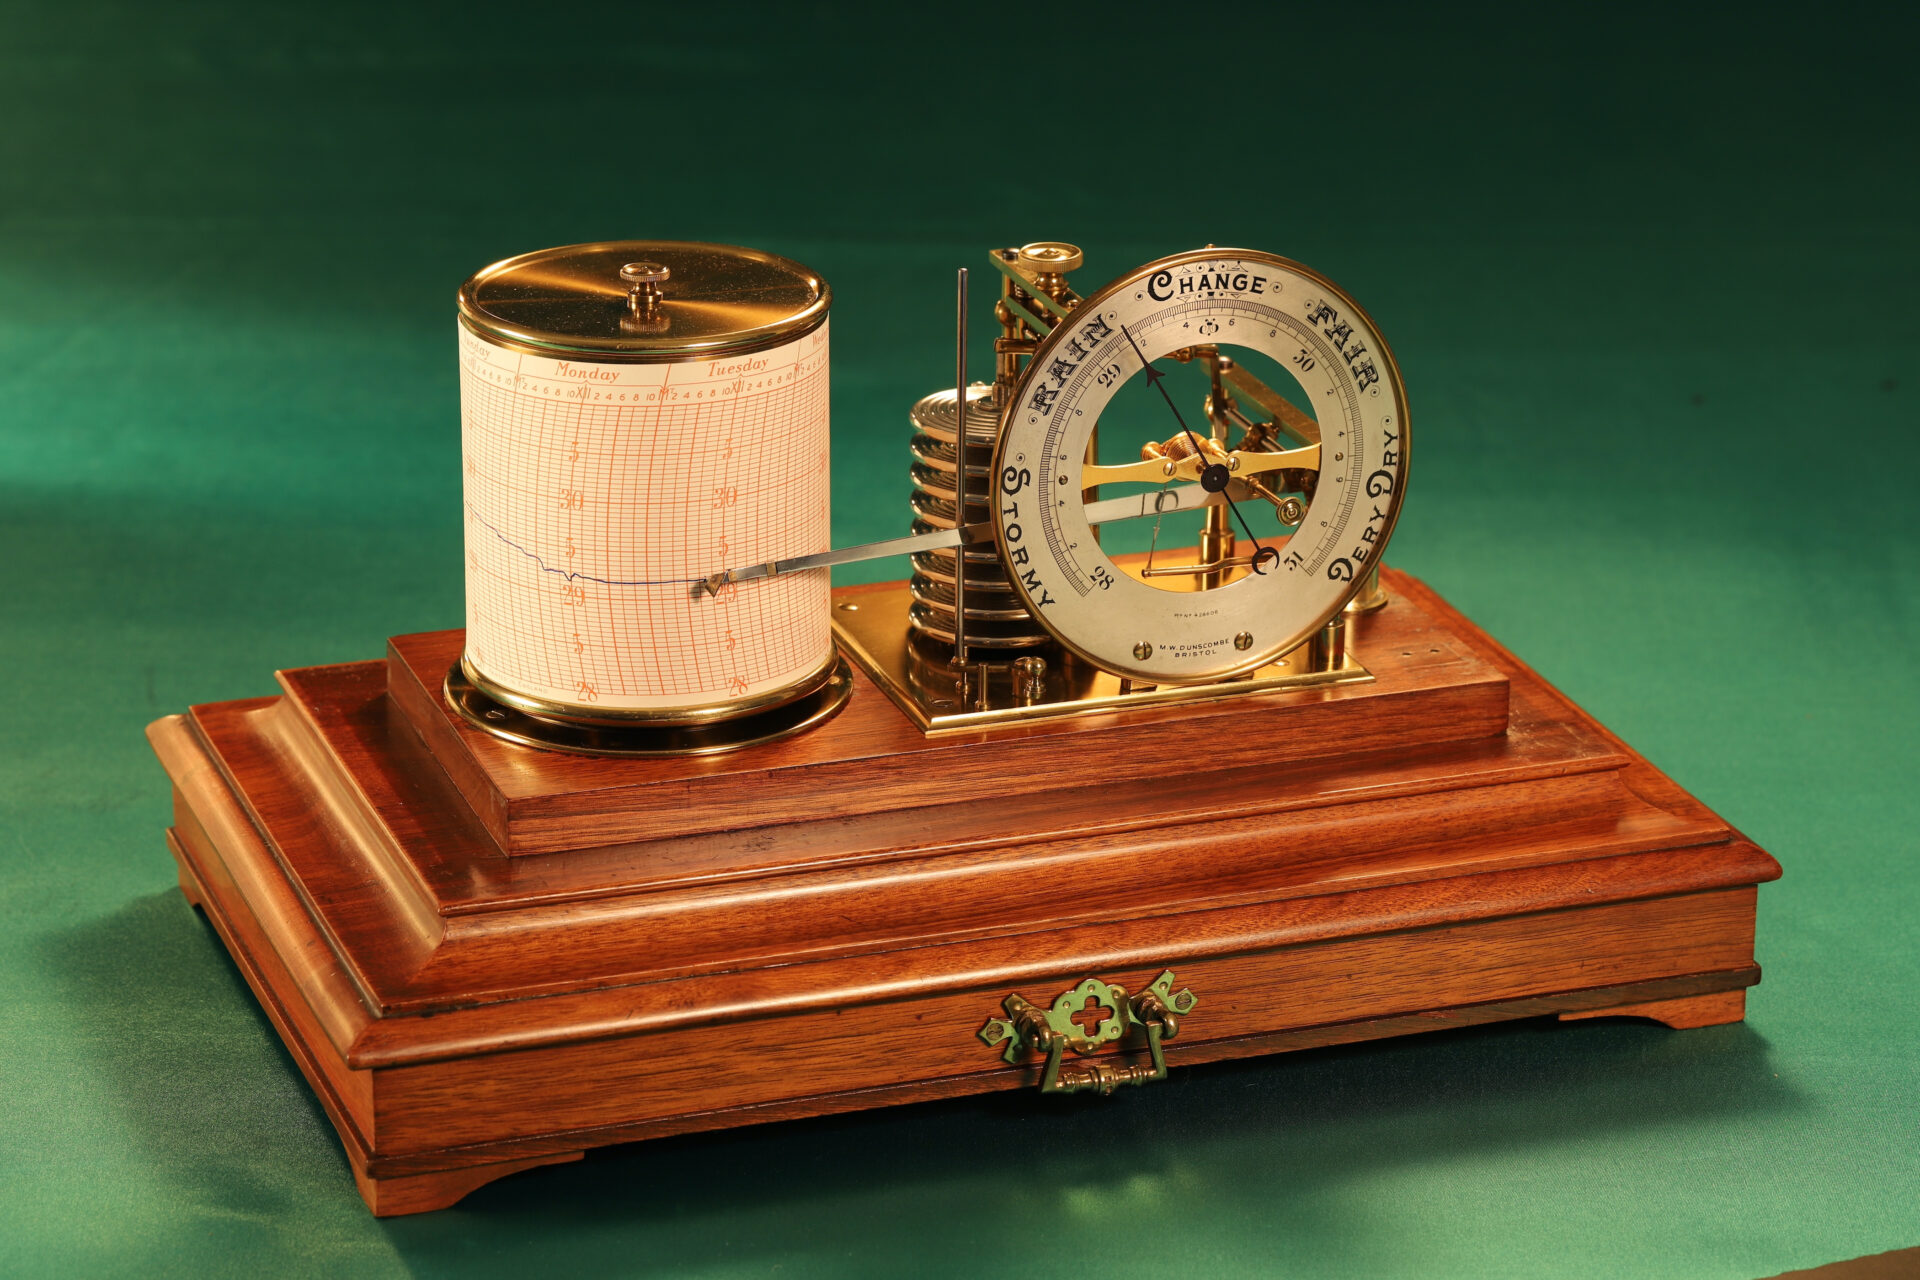 Image of Short & Mason Barograph Retailed by Dunscombe, without case lid, taken from lefthand side